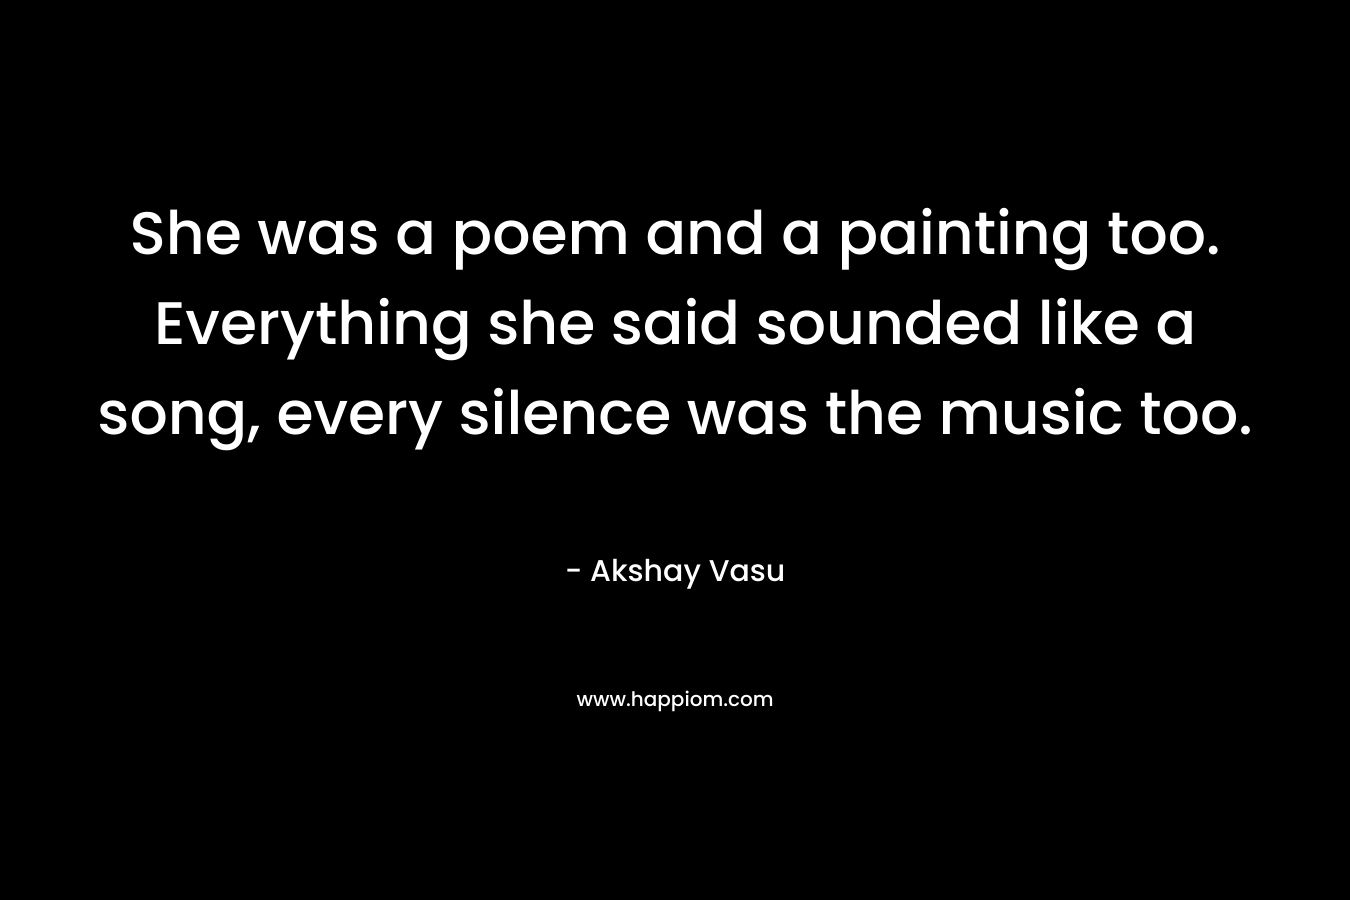 She was a poem and a painting too. Everything she said sounded like a song, every silence was the music too.